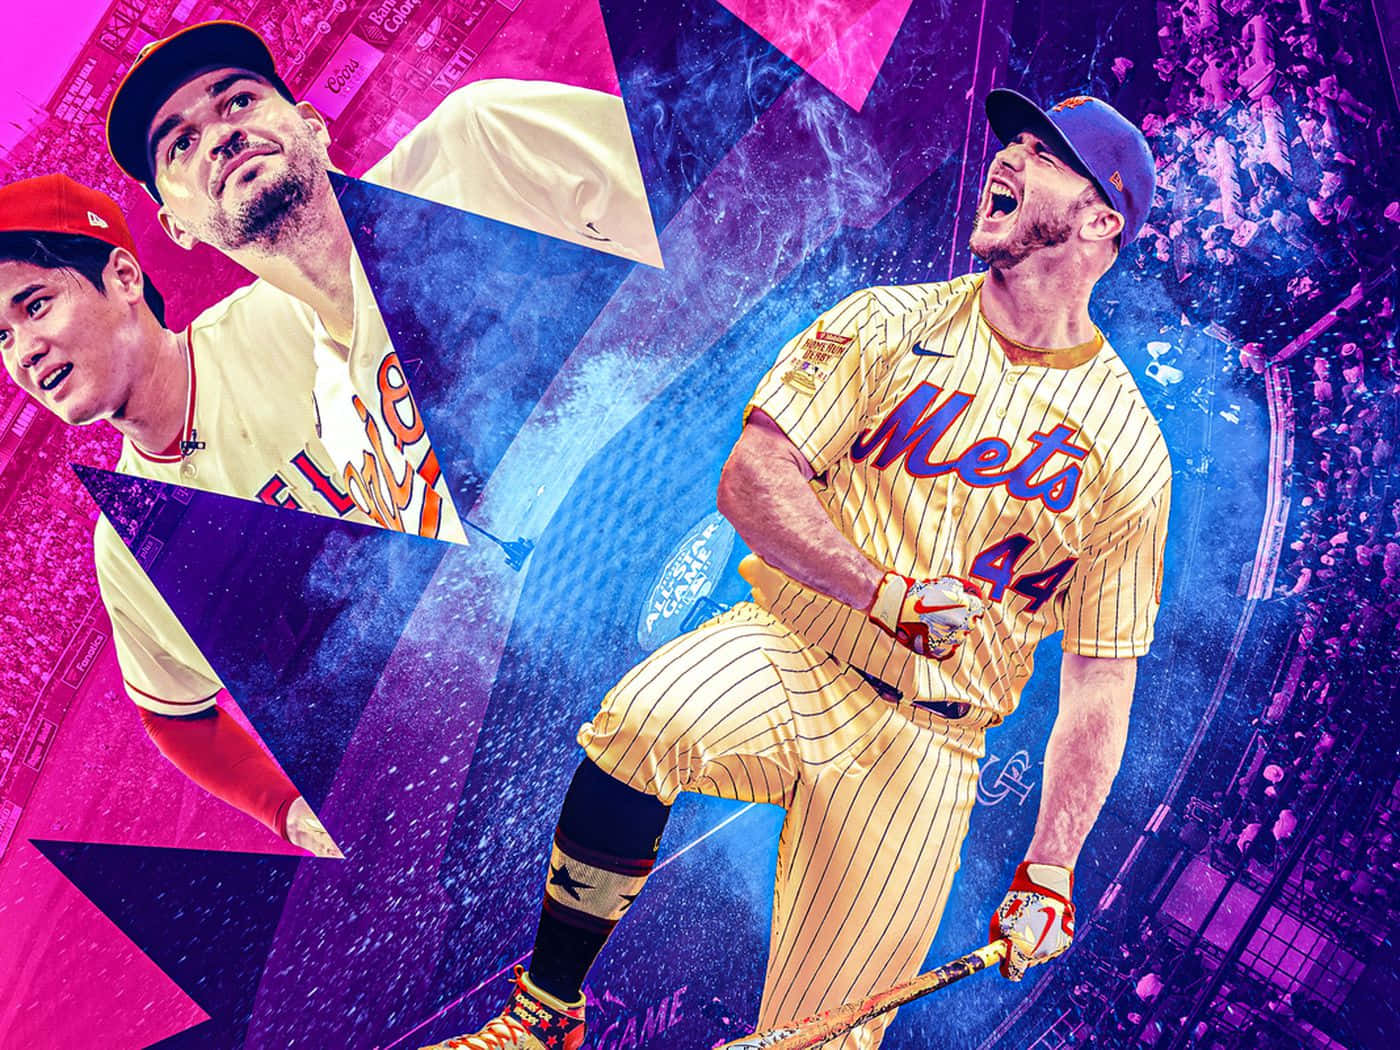 New York Mets rookie Pete Alonso rounds the bases during an emotional home game. Wallpaper